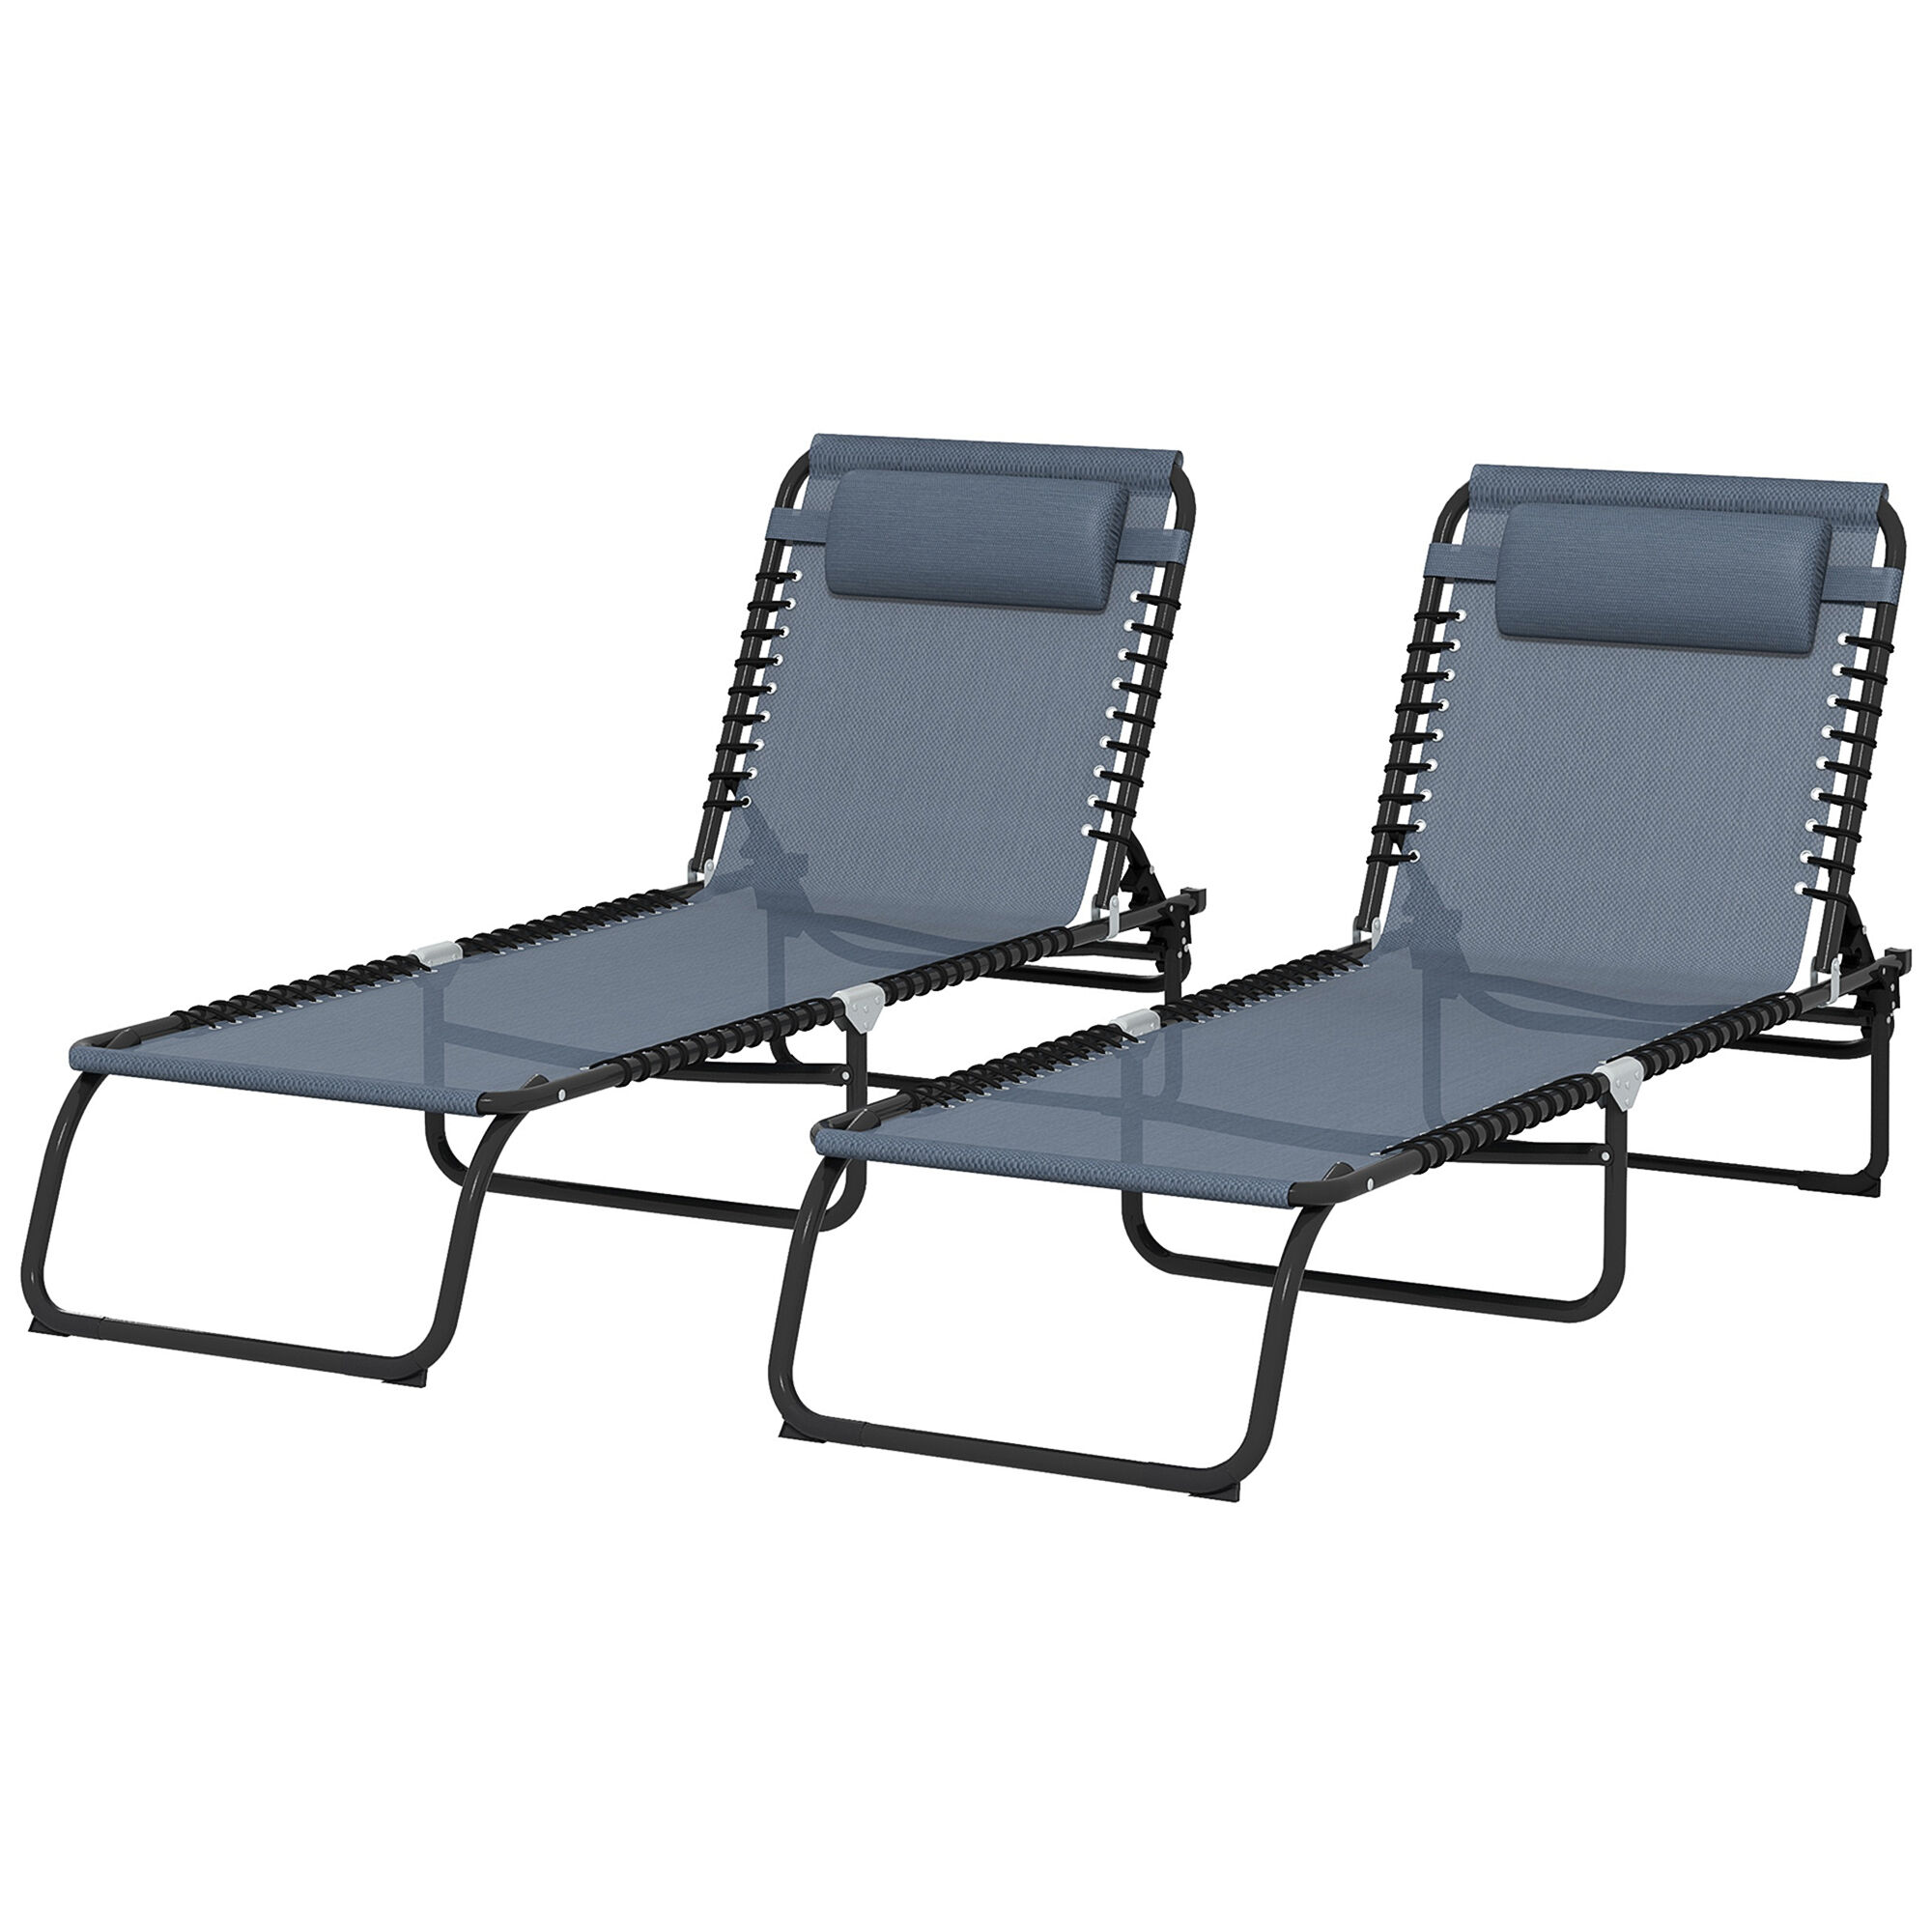 Outsunny 2 Pieces of 4-Position Reclining Beach Chair Chaise Lounge Folding Chair - Gray